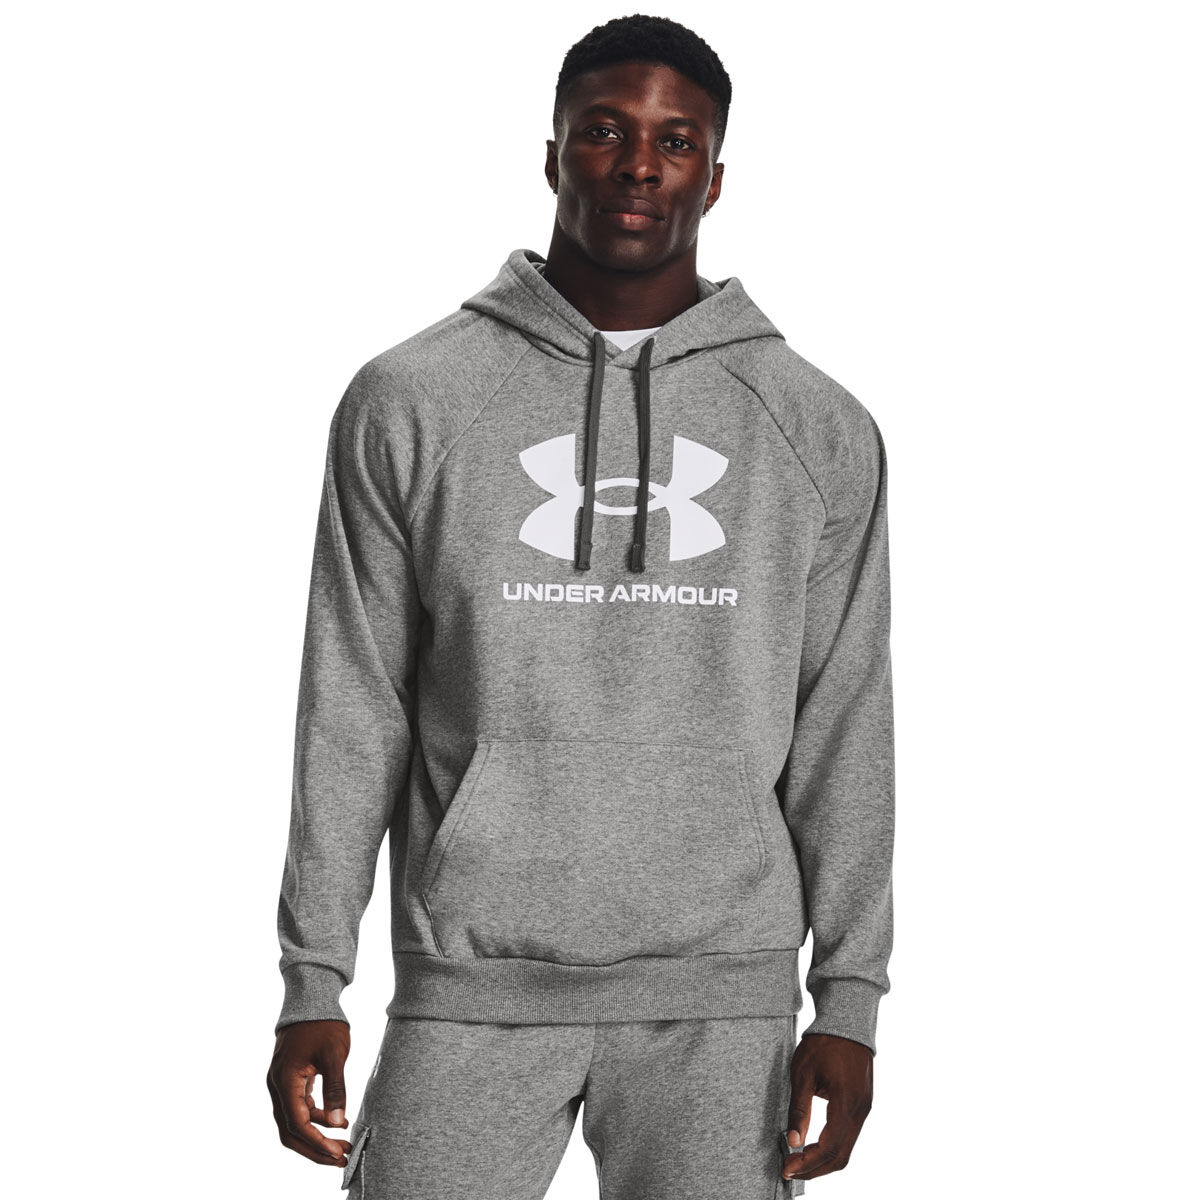 Under Armour Mens Rival Fitted OTH Hoody Hoodie Hooded Top Long Sleeve Warm